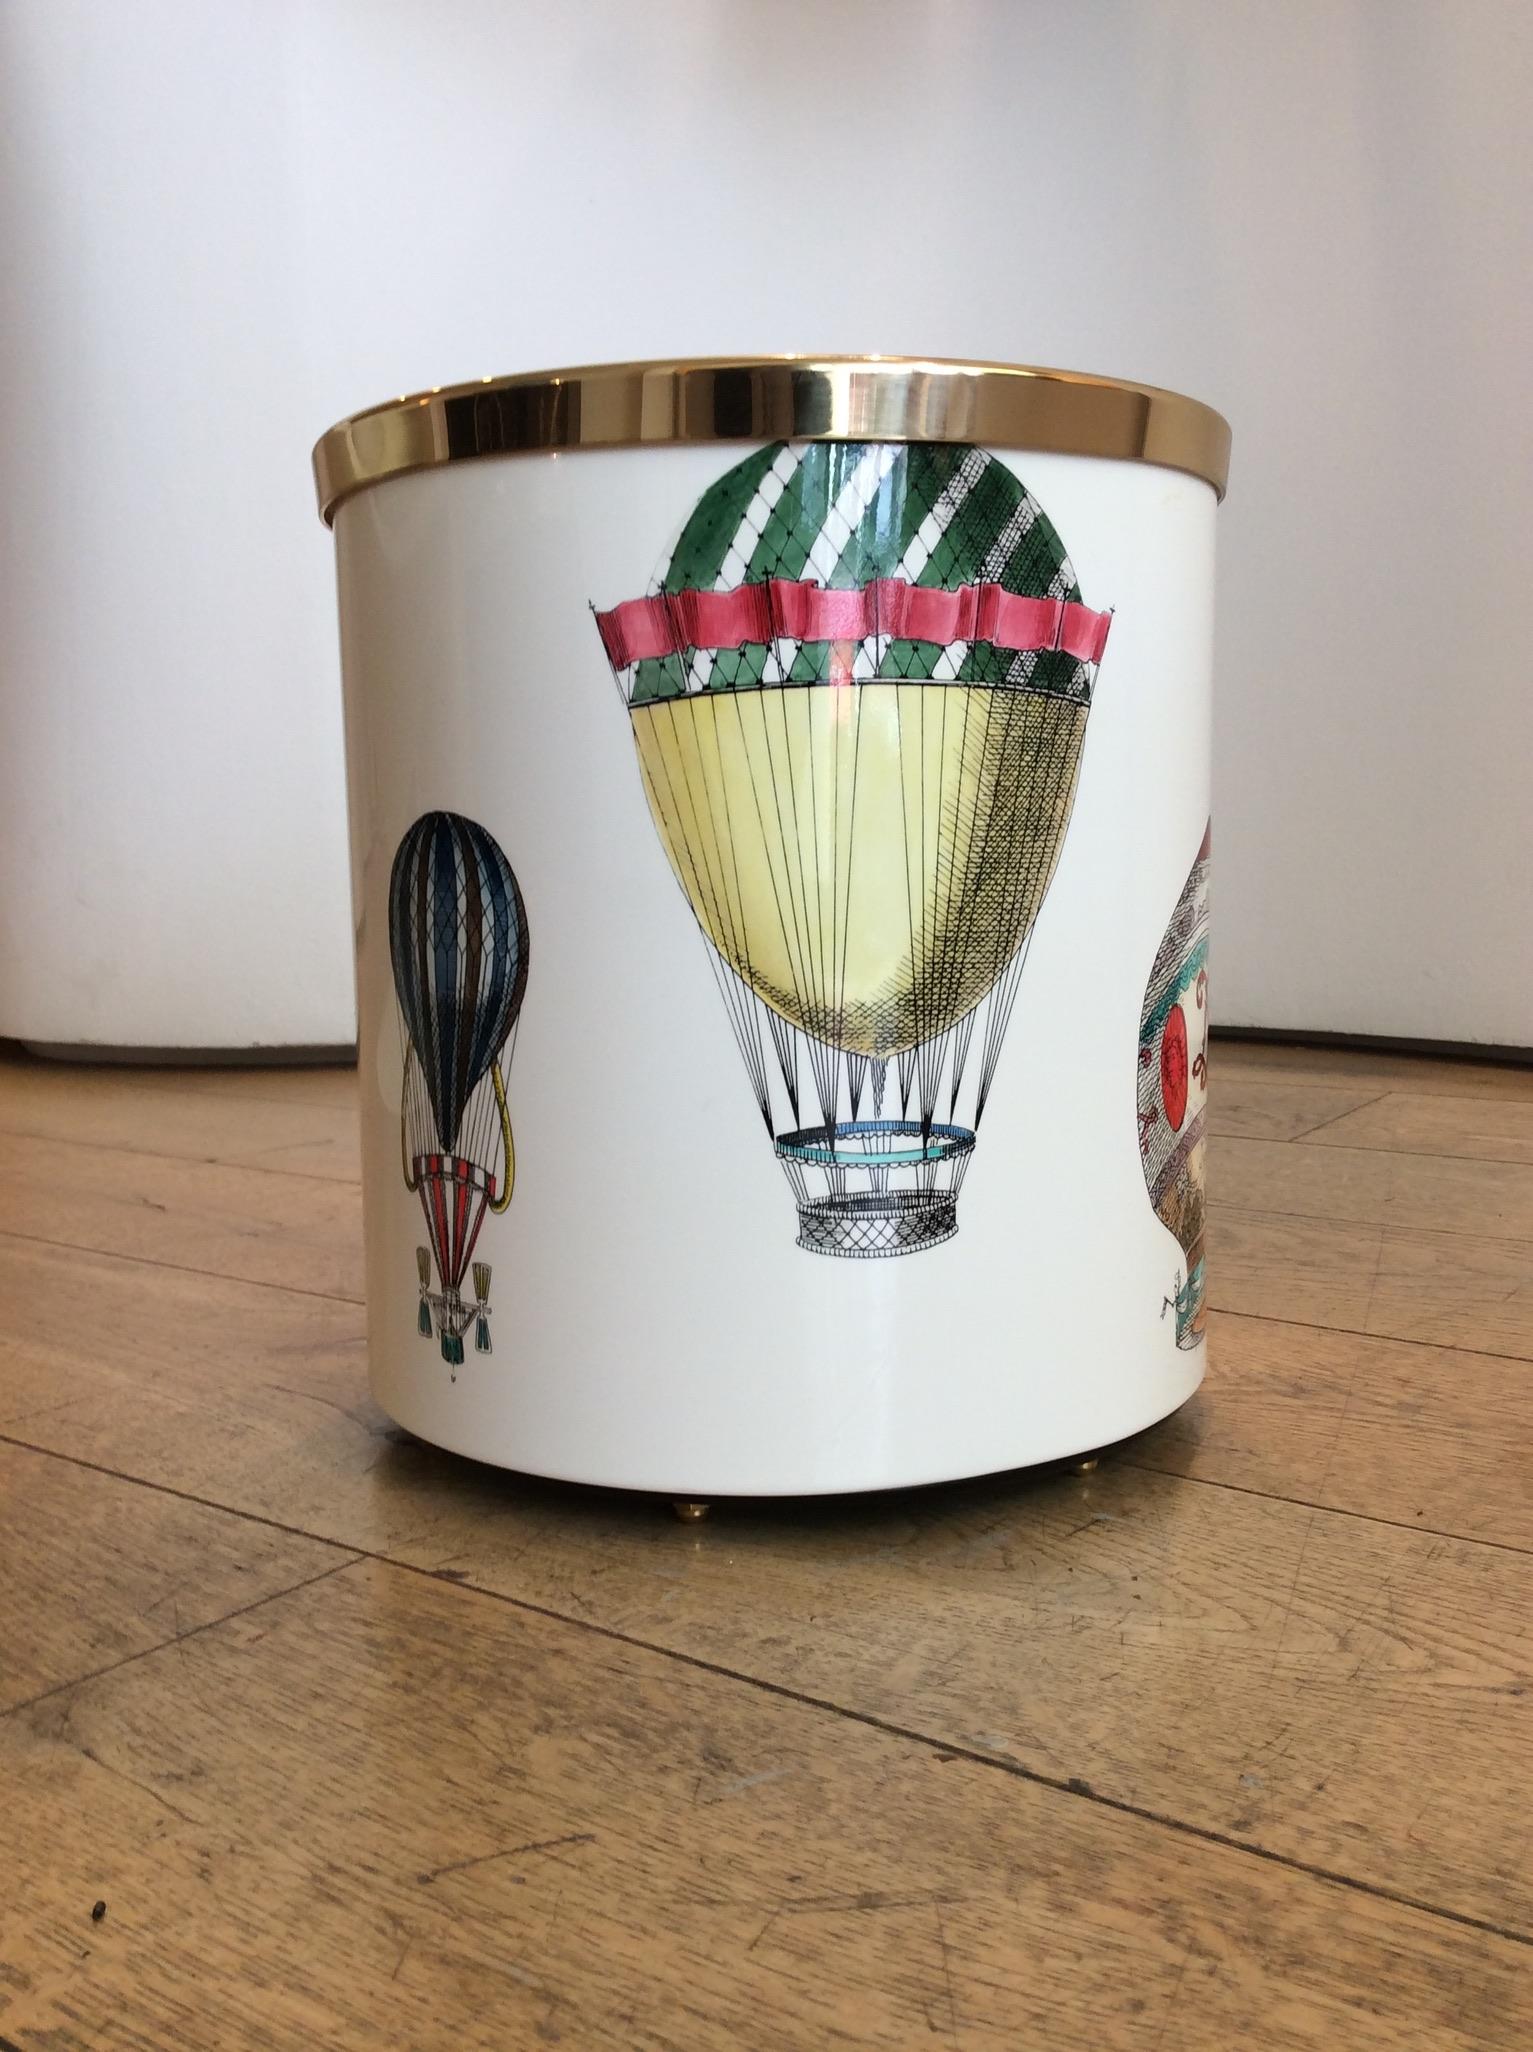 Charming hand-coloured transfer printed design of ornate hot air balloons on metal with brass rim.
Measures: H 28 / Ø 26 cm.